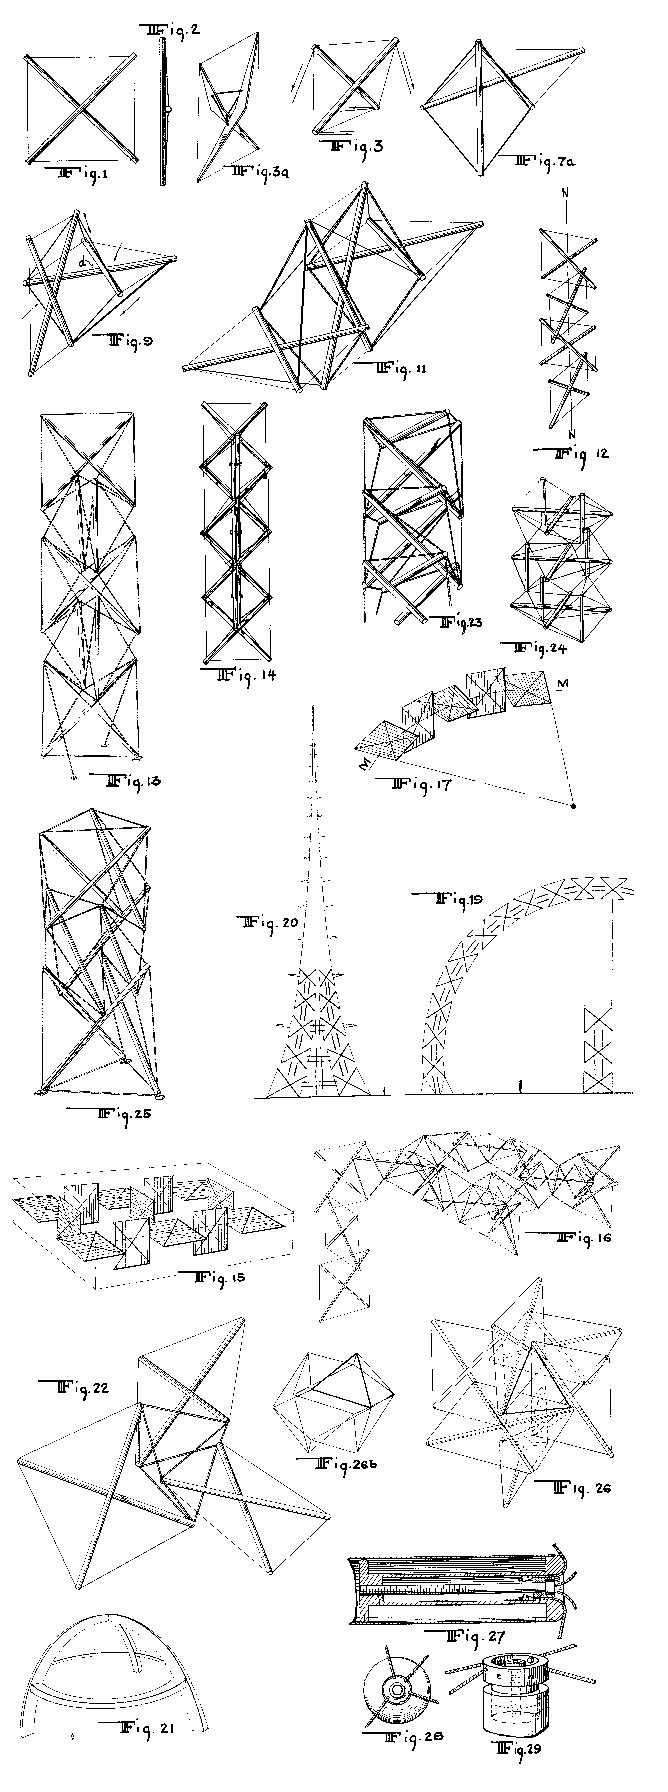 Patent #3,169,611 drawings by Kenneth Snelson